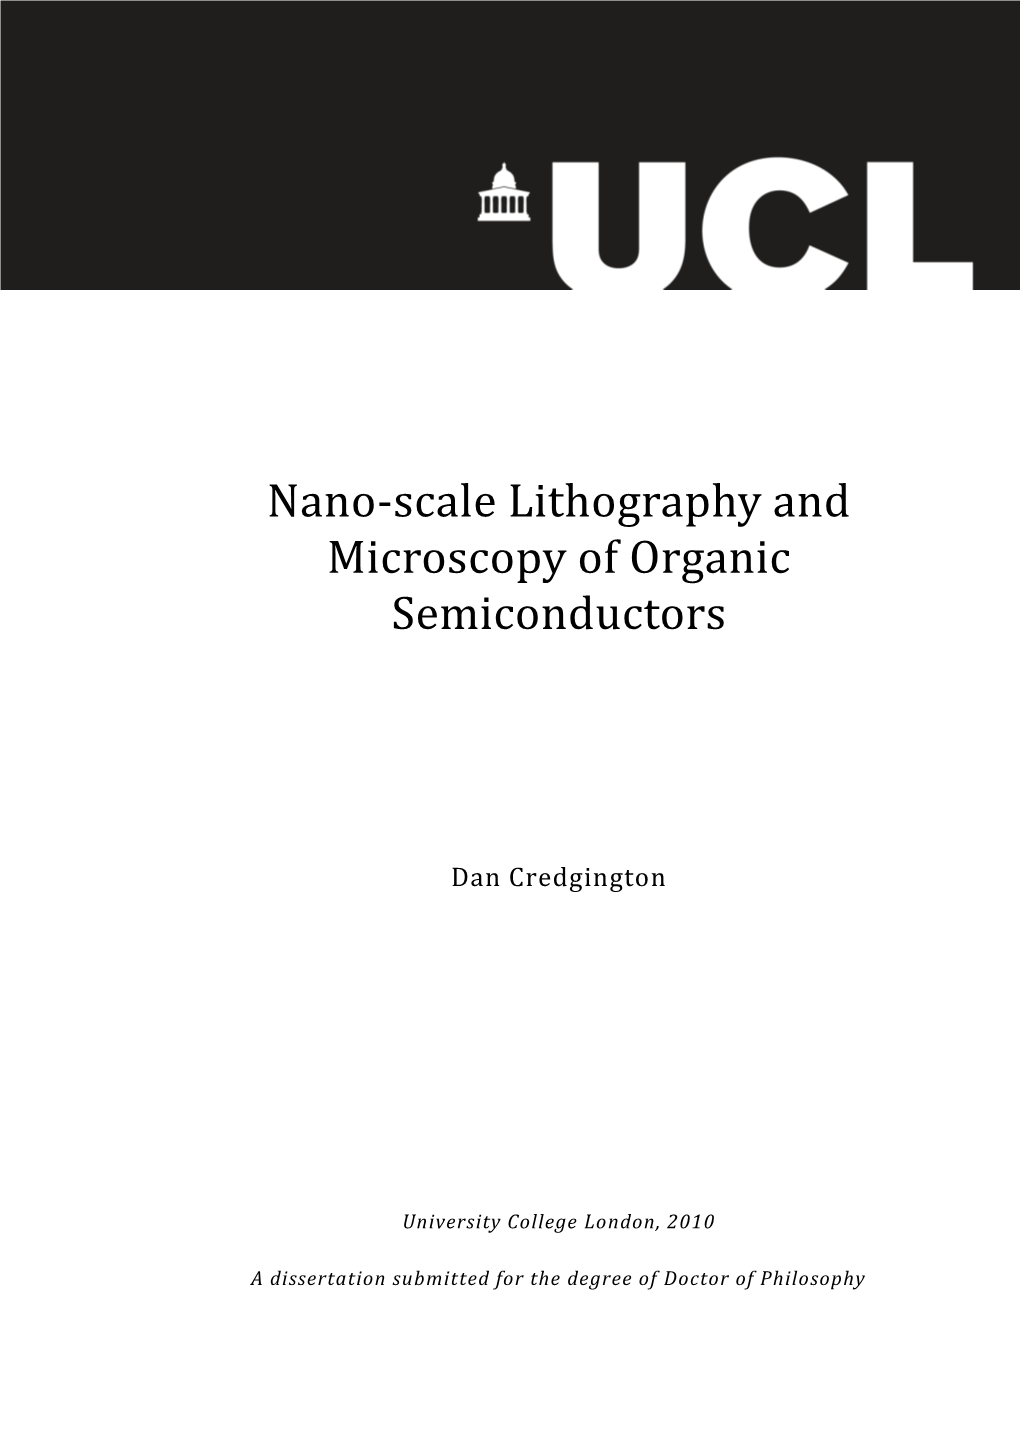 Nano-Scale Lithography and Microscopy of Organic Semiconductors